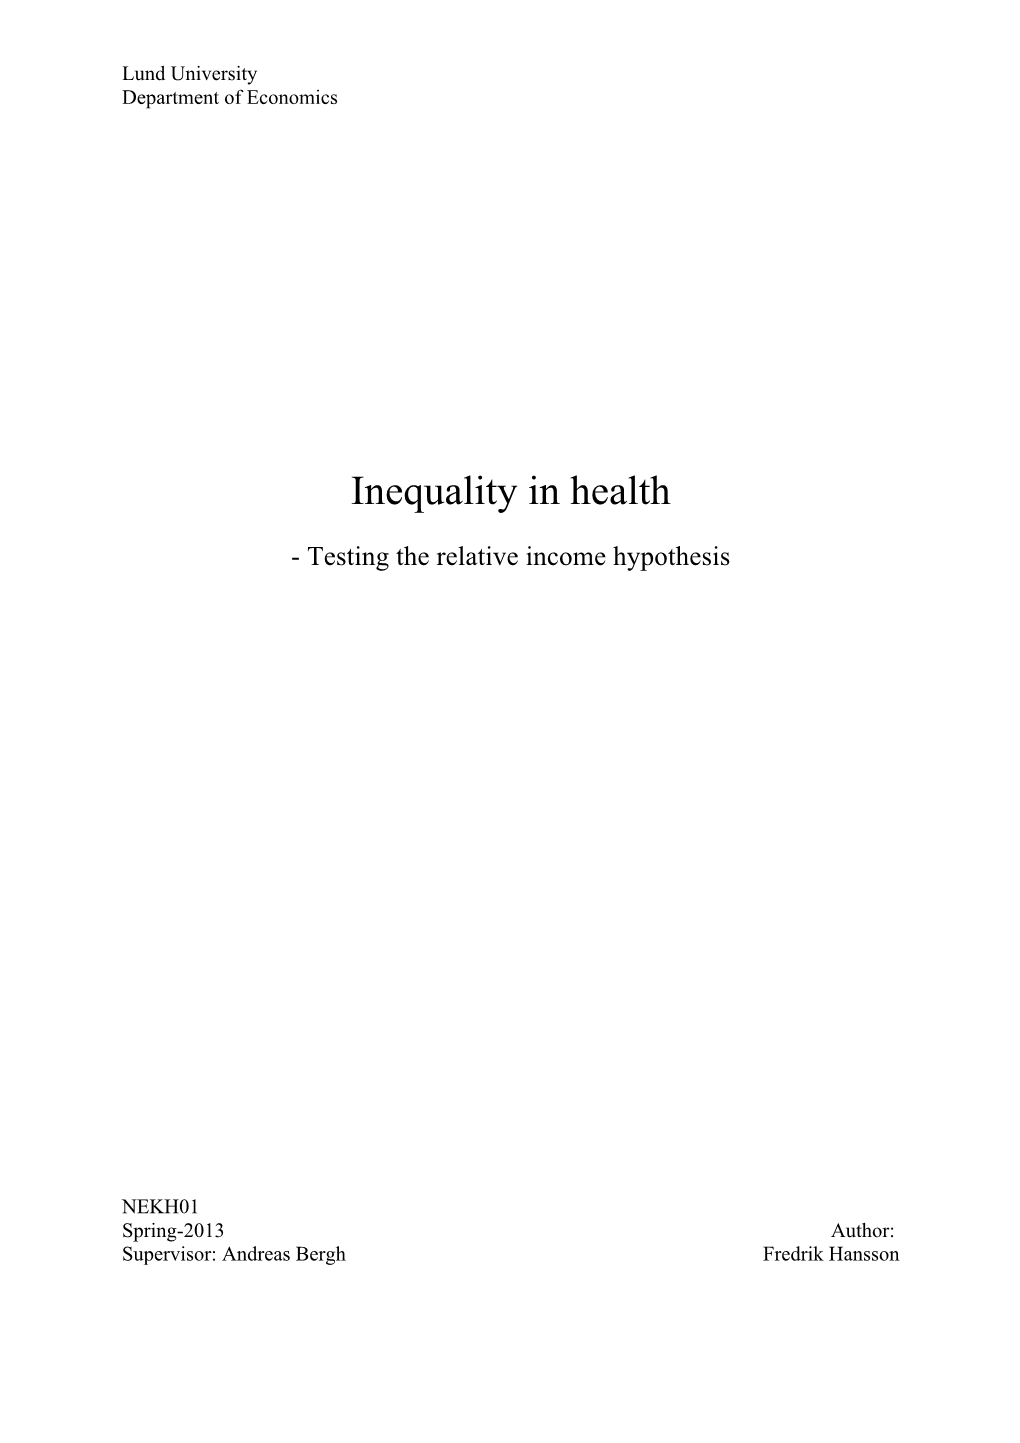 Inequality in Health